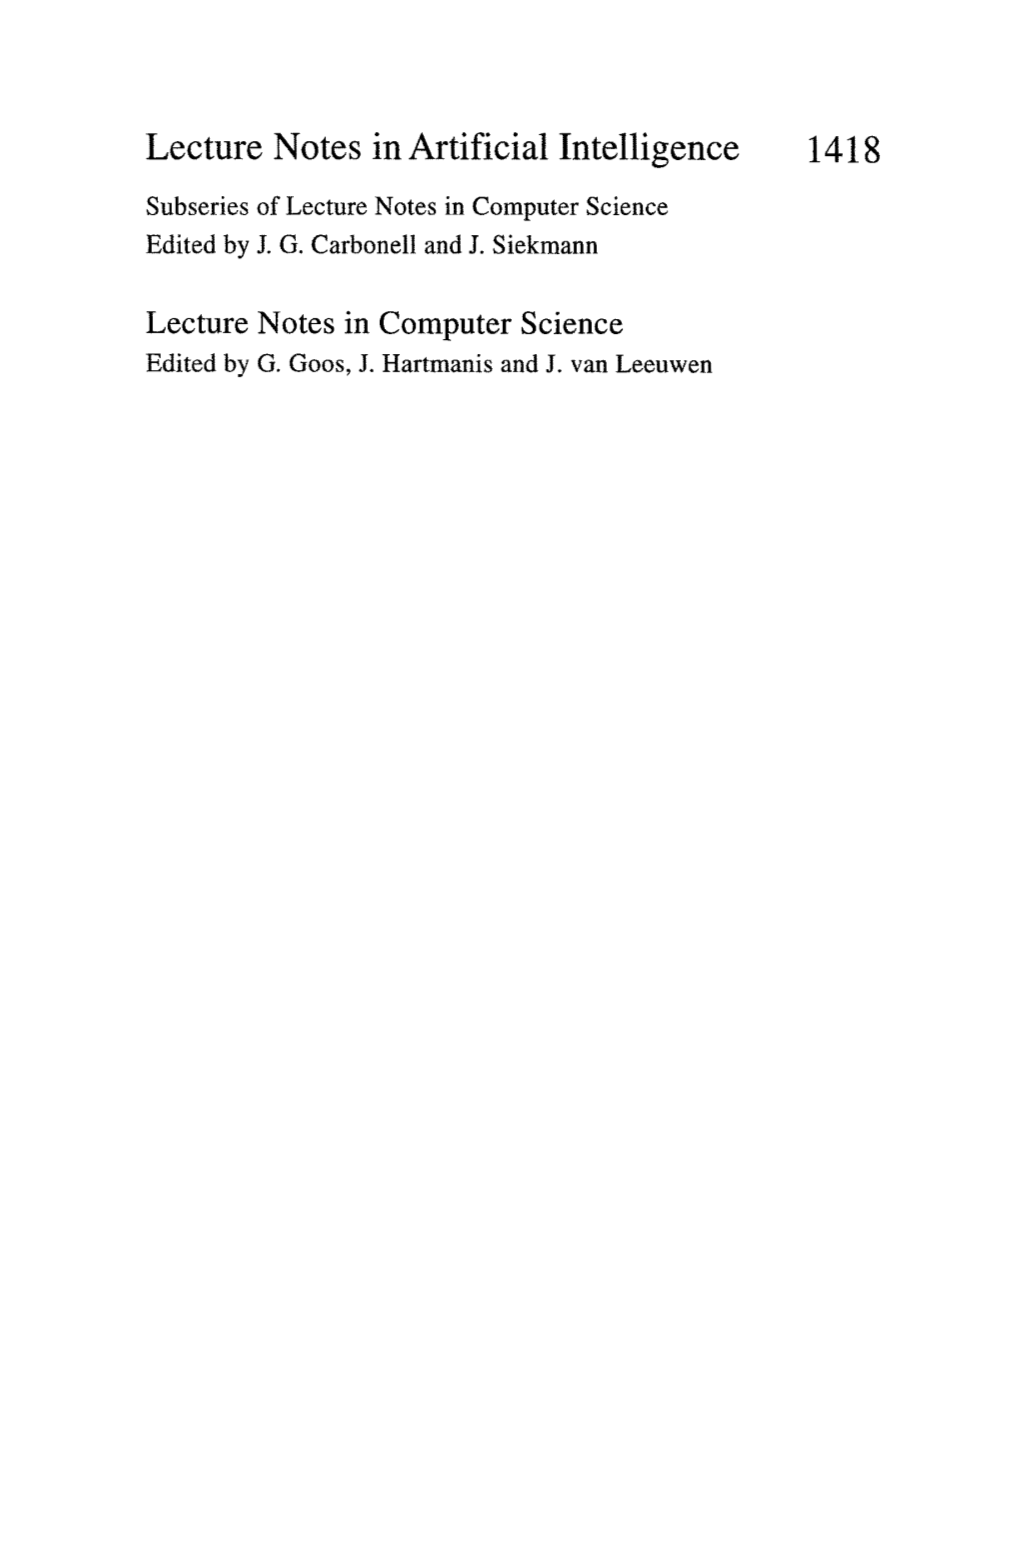 Lecture Notes in Computer Science Edited by J